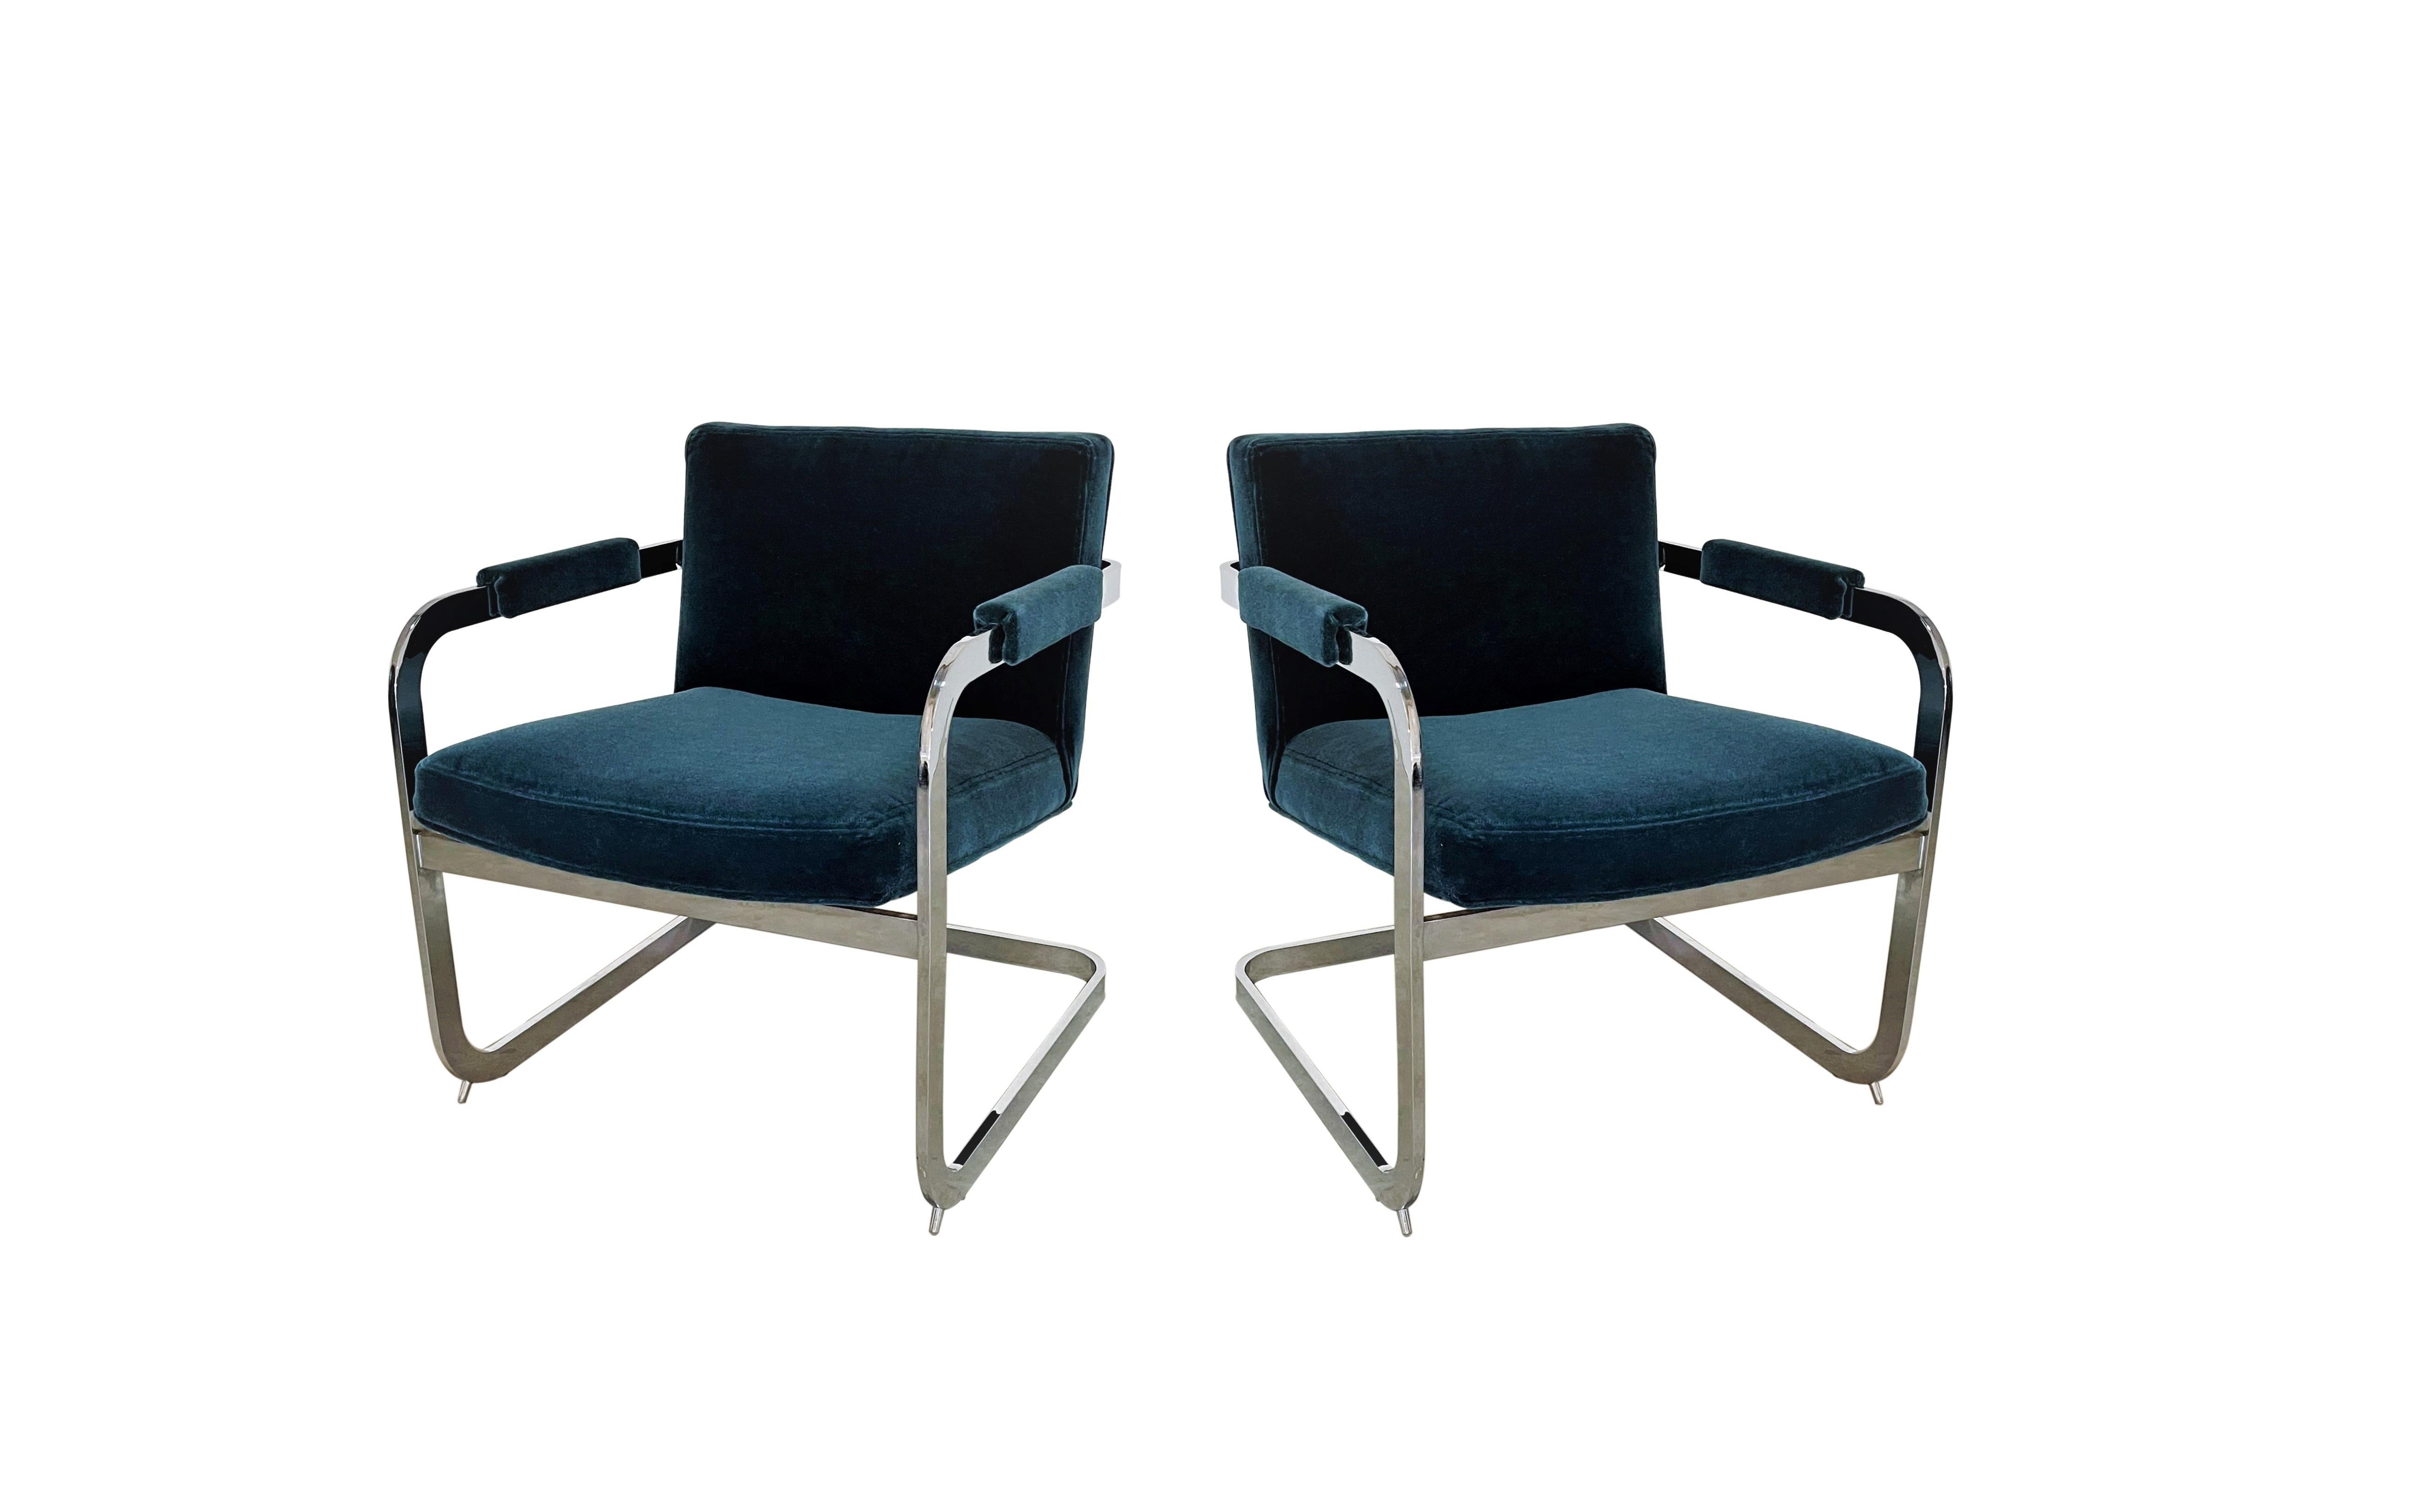 American 70's Modern Cantilever Armchairs by Milo Baughman for Thayer Coggin